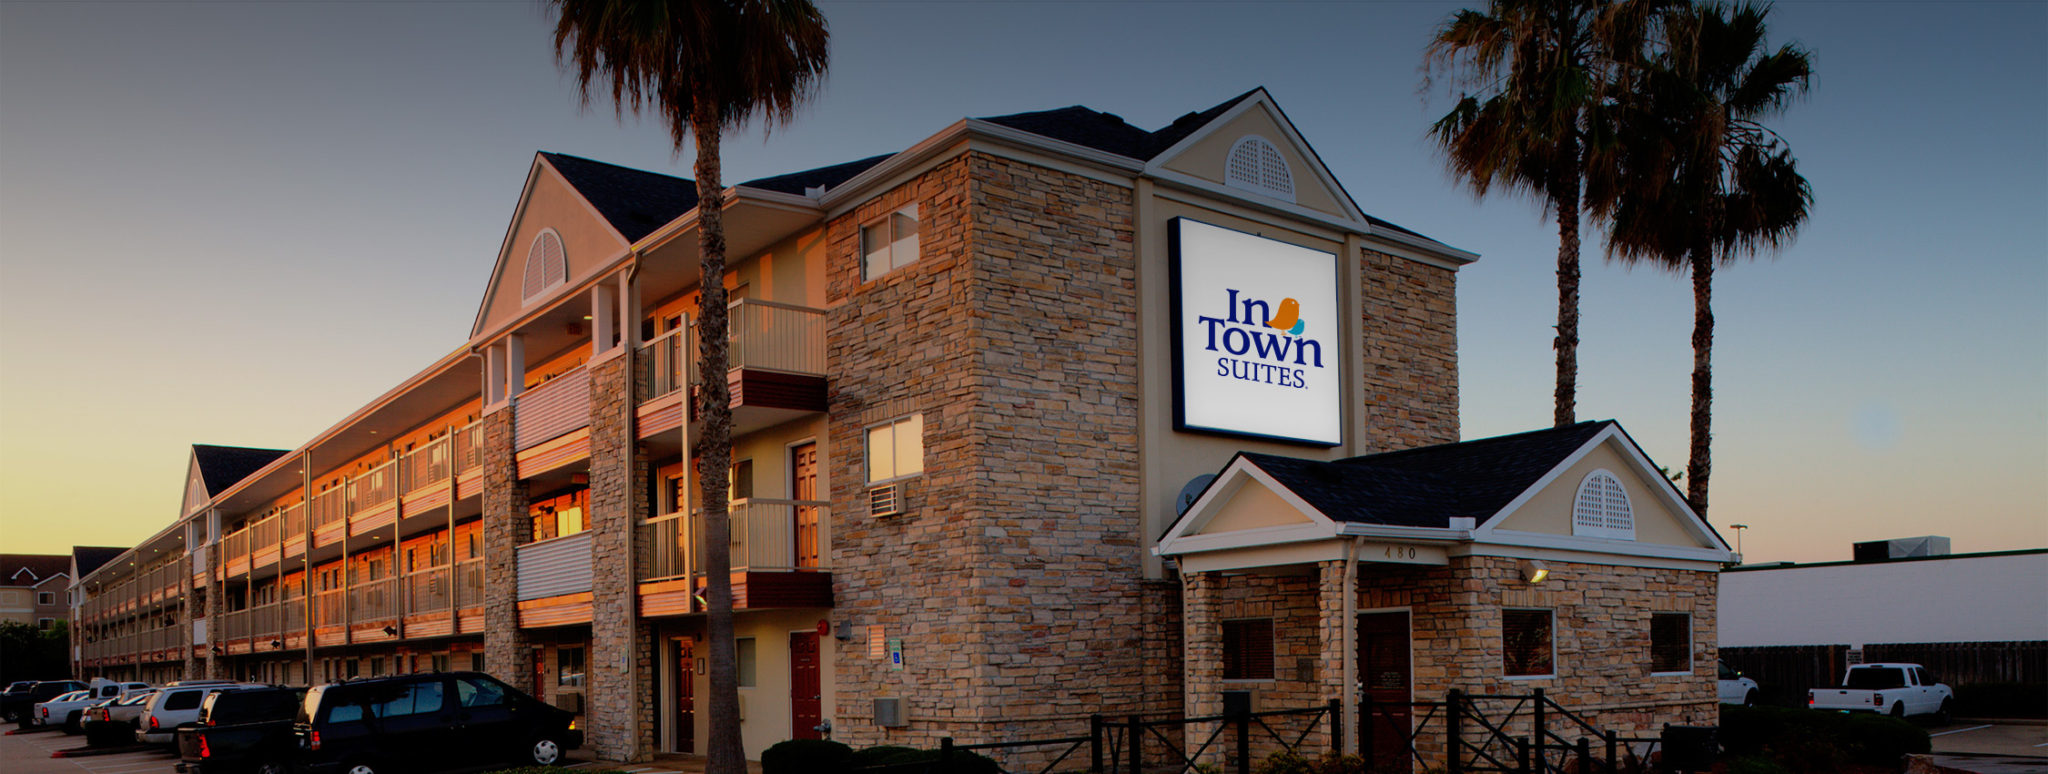 Extended Stay Hotel Intown Suites